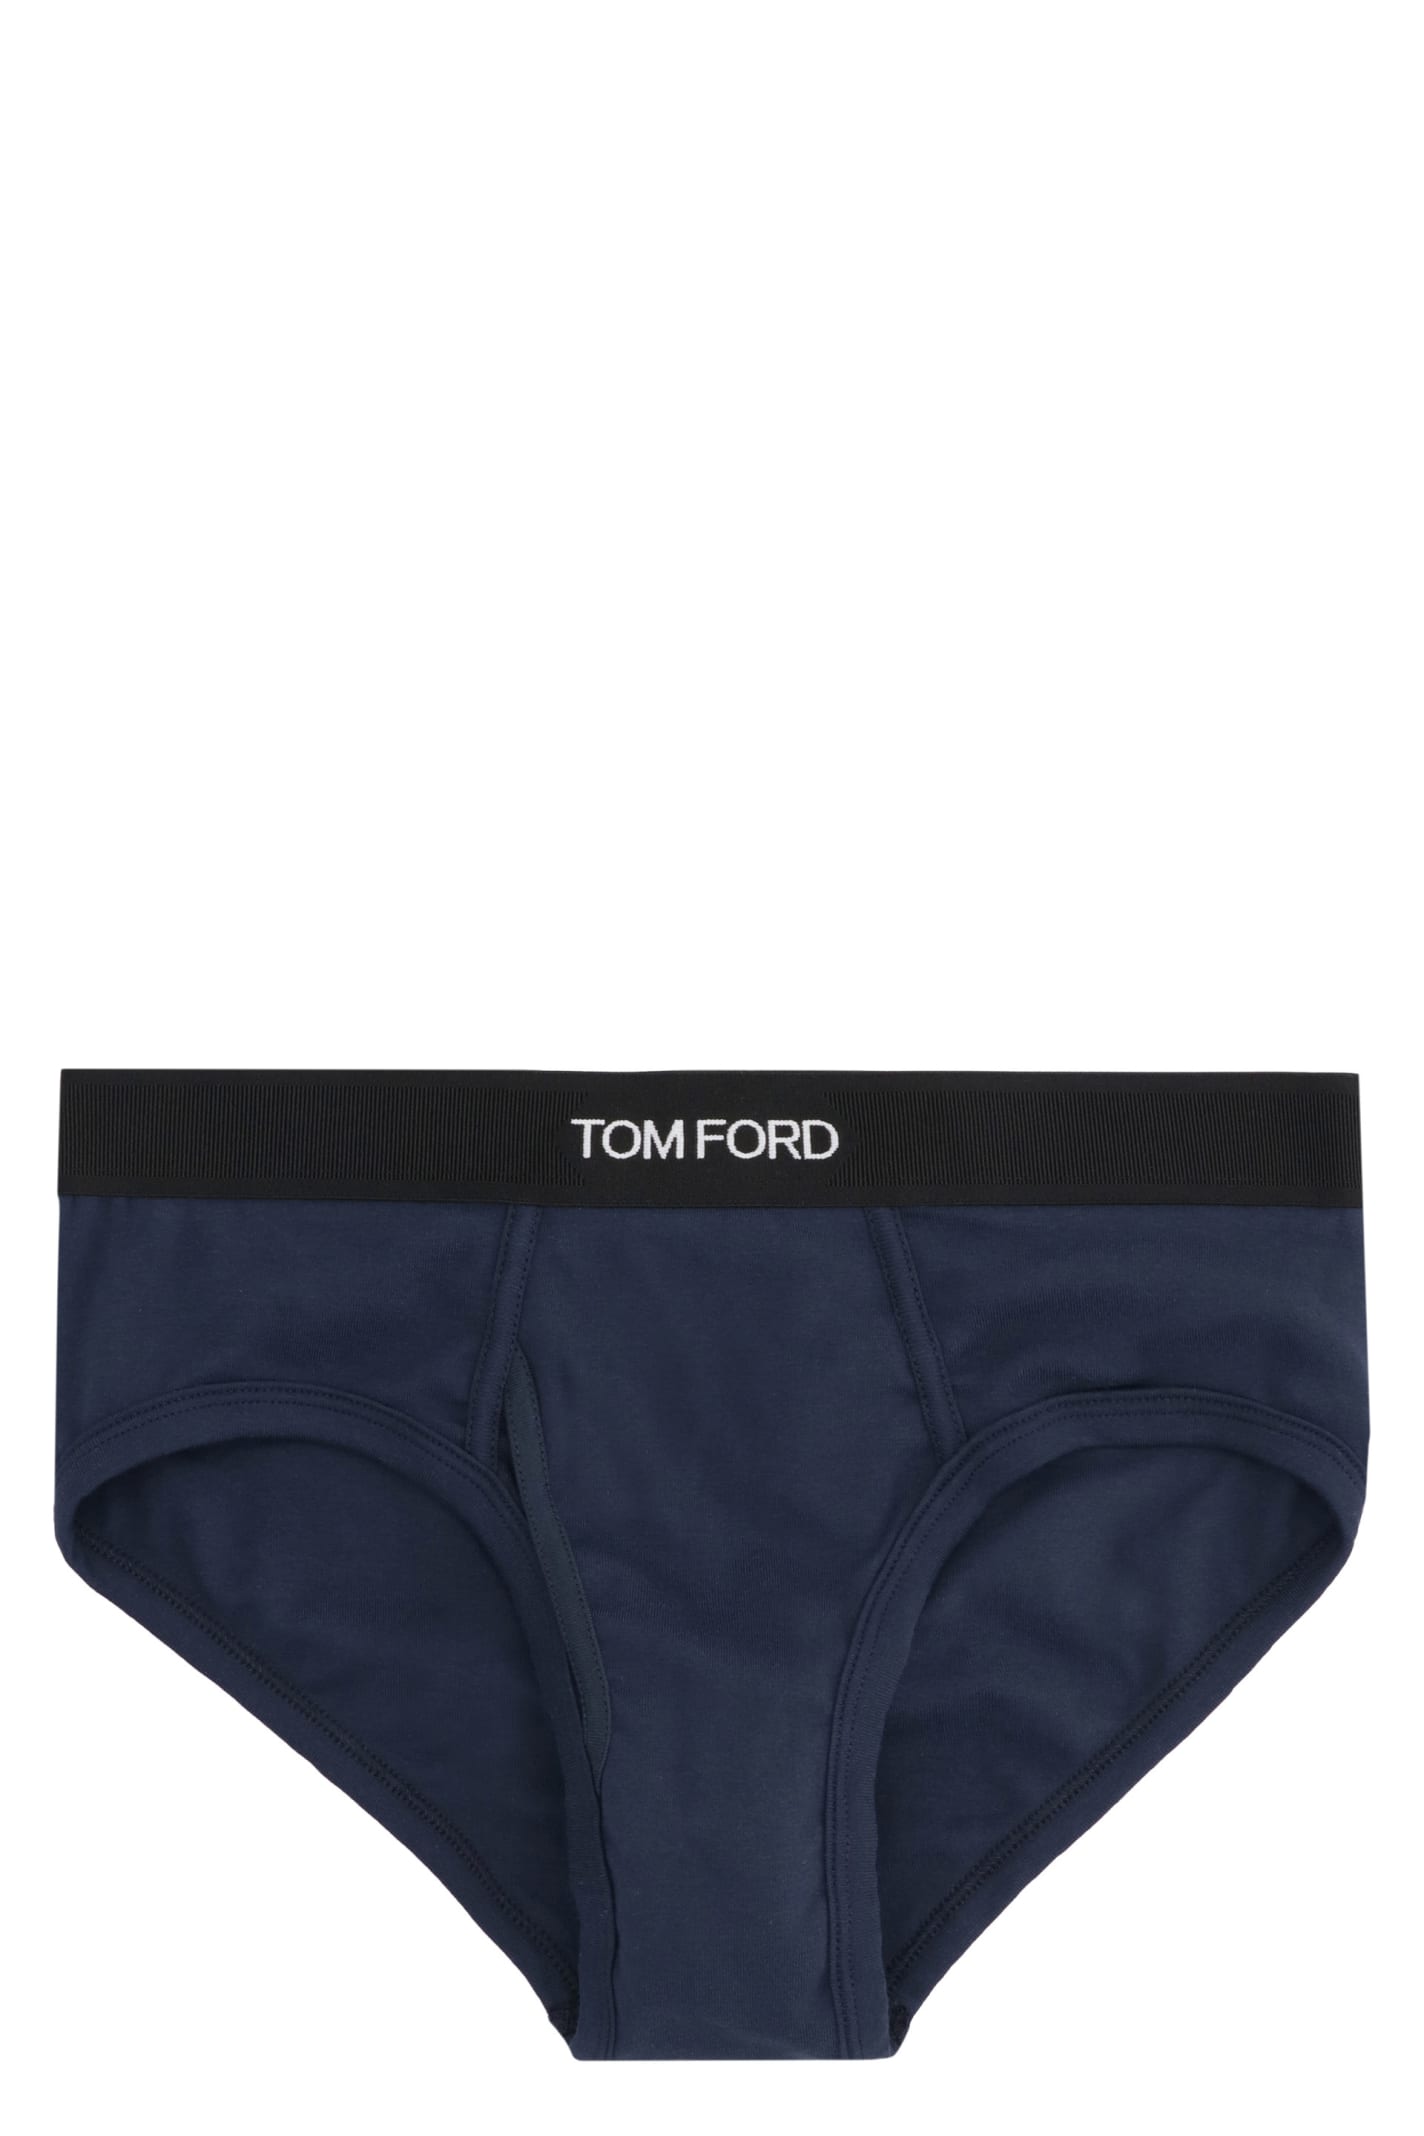 TOM FORD COTTON BRIEFS WITH ELASTIC BAND